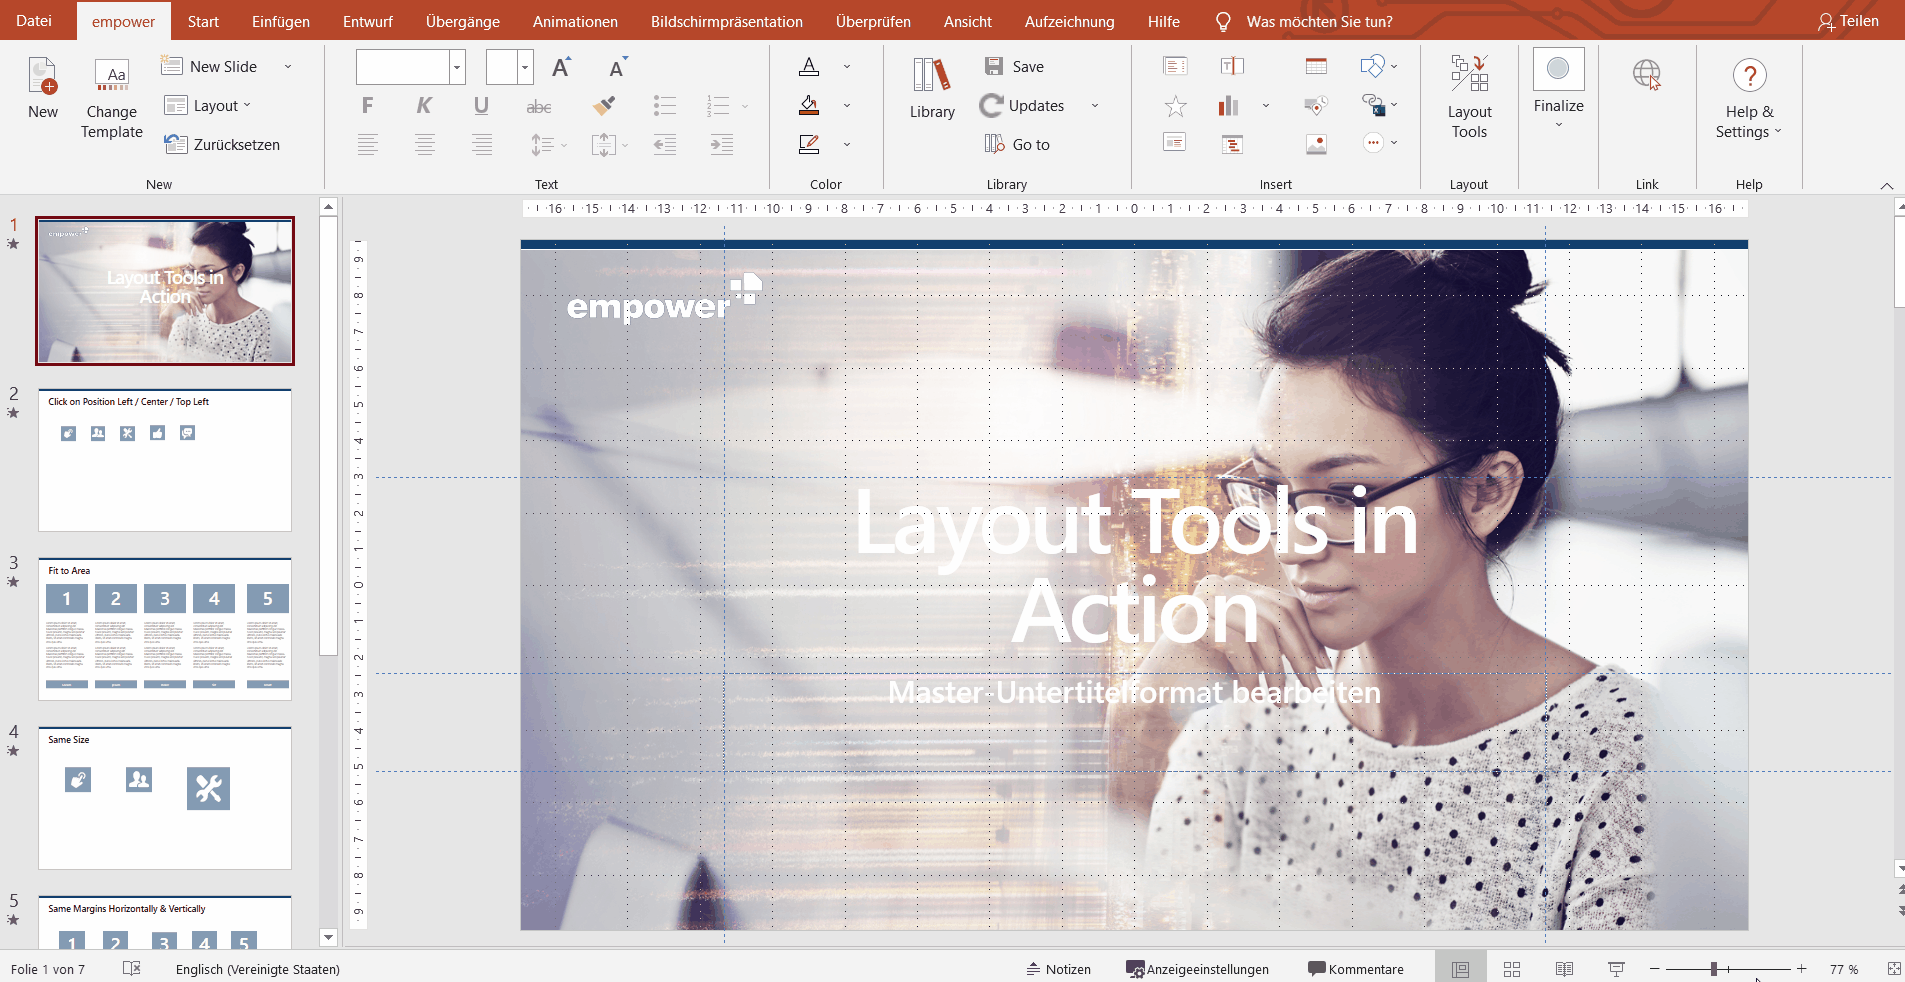 better presentations with Powerpoint layout tools for the perfect presentation